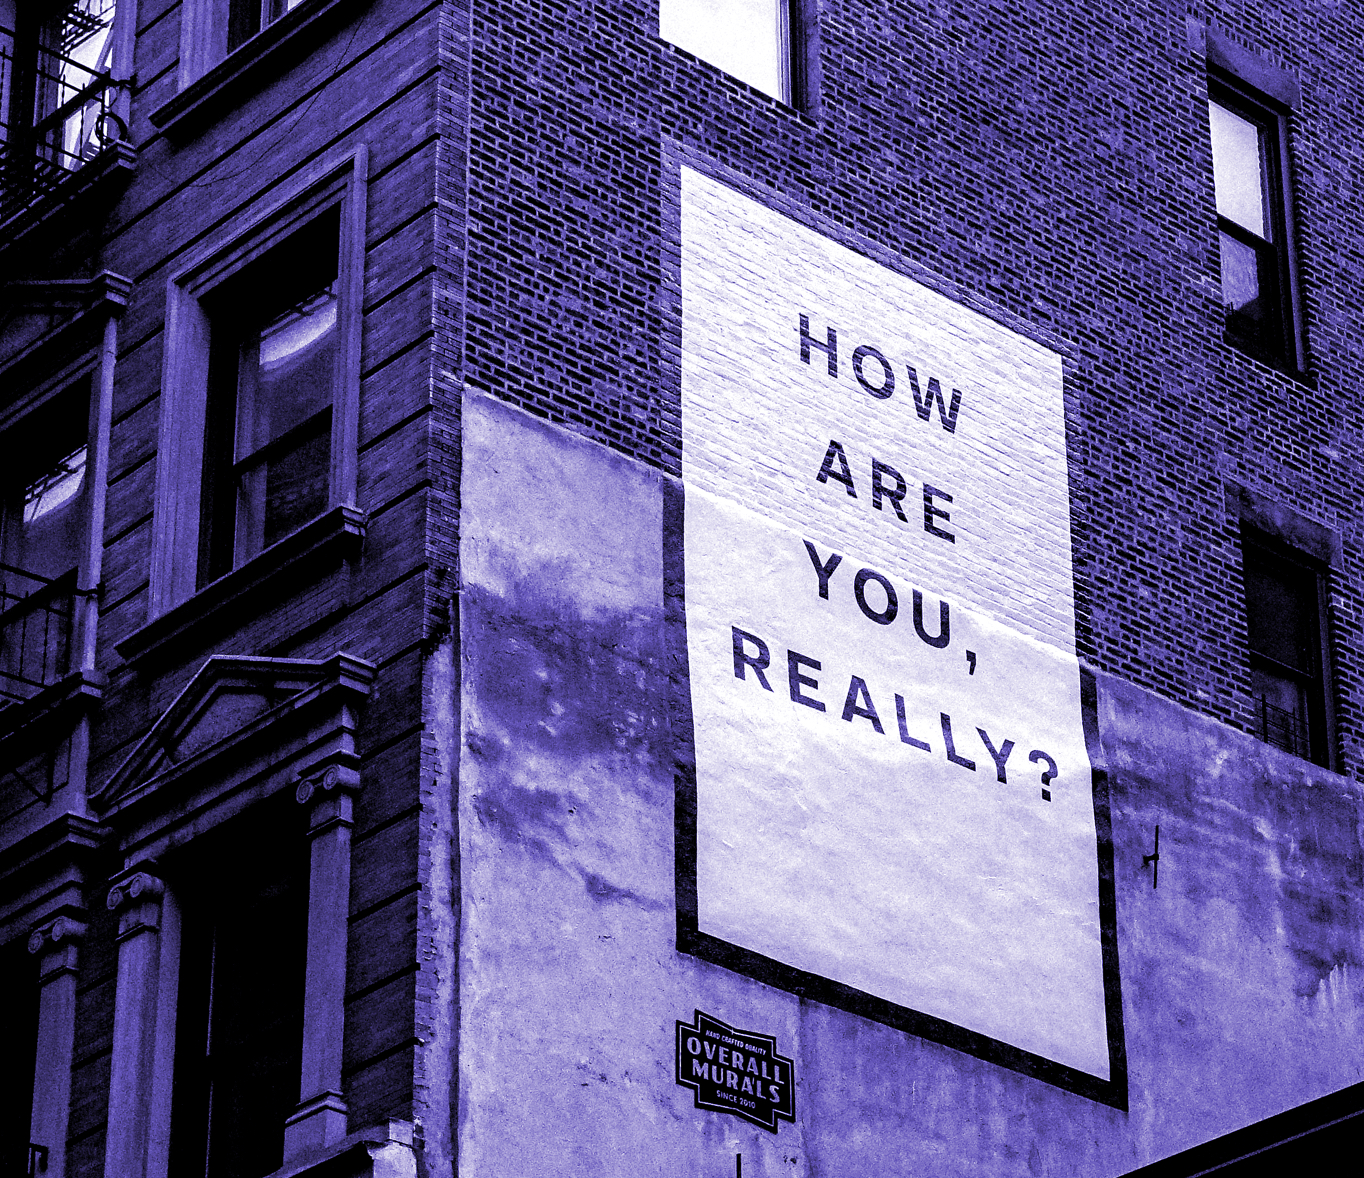 Building walls with a mural reading "How are you, really?"